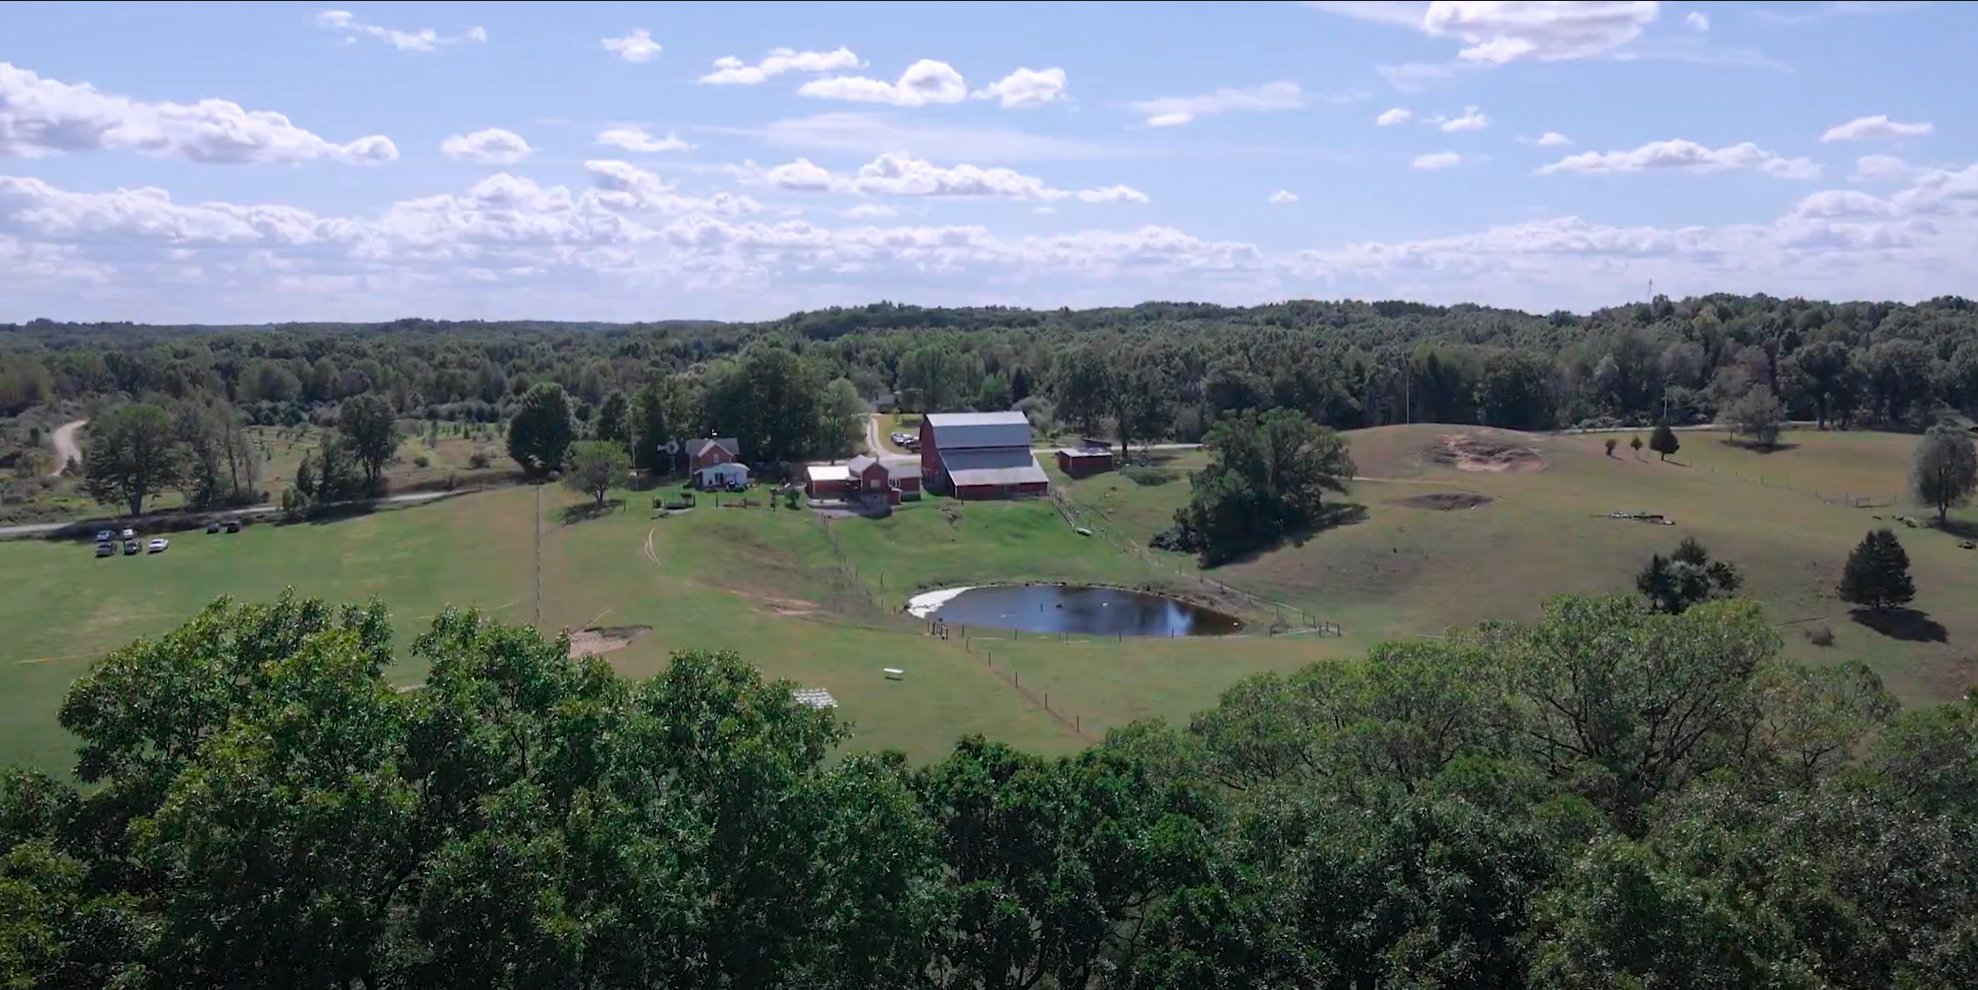 Main house on family farm in Delton MI, drone photo by wedding videographer at AA studios LLC